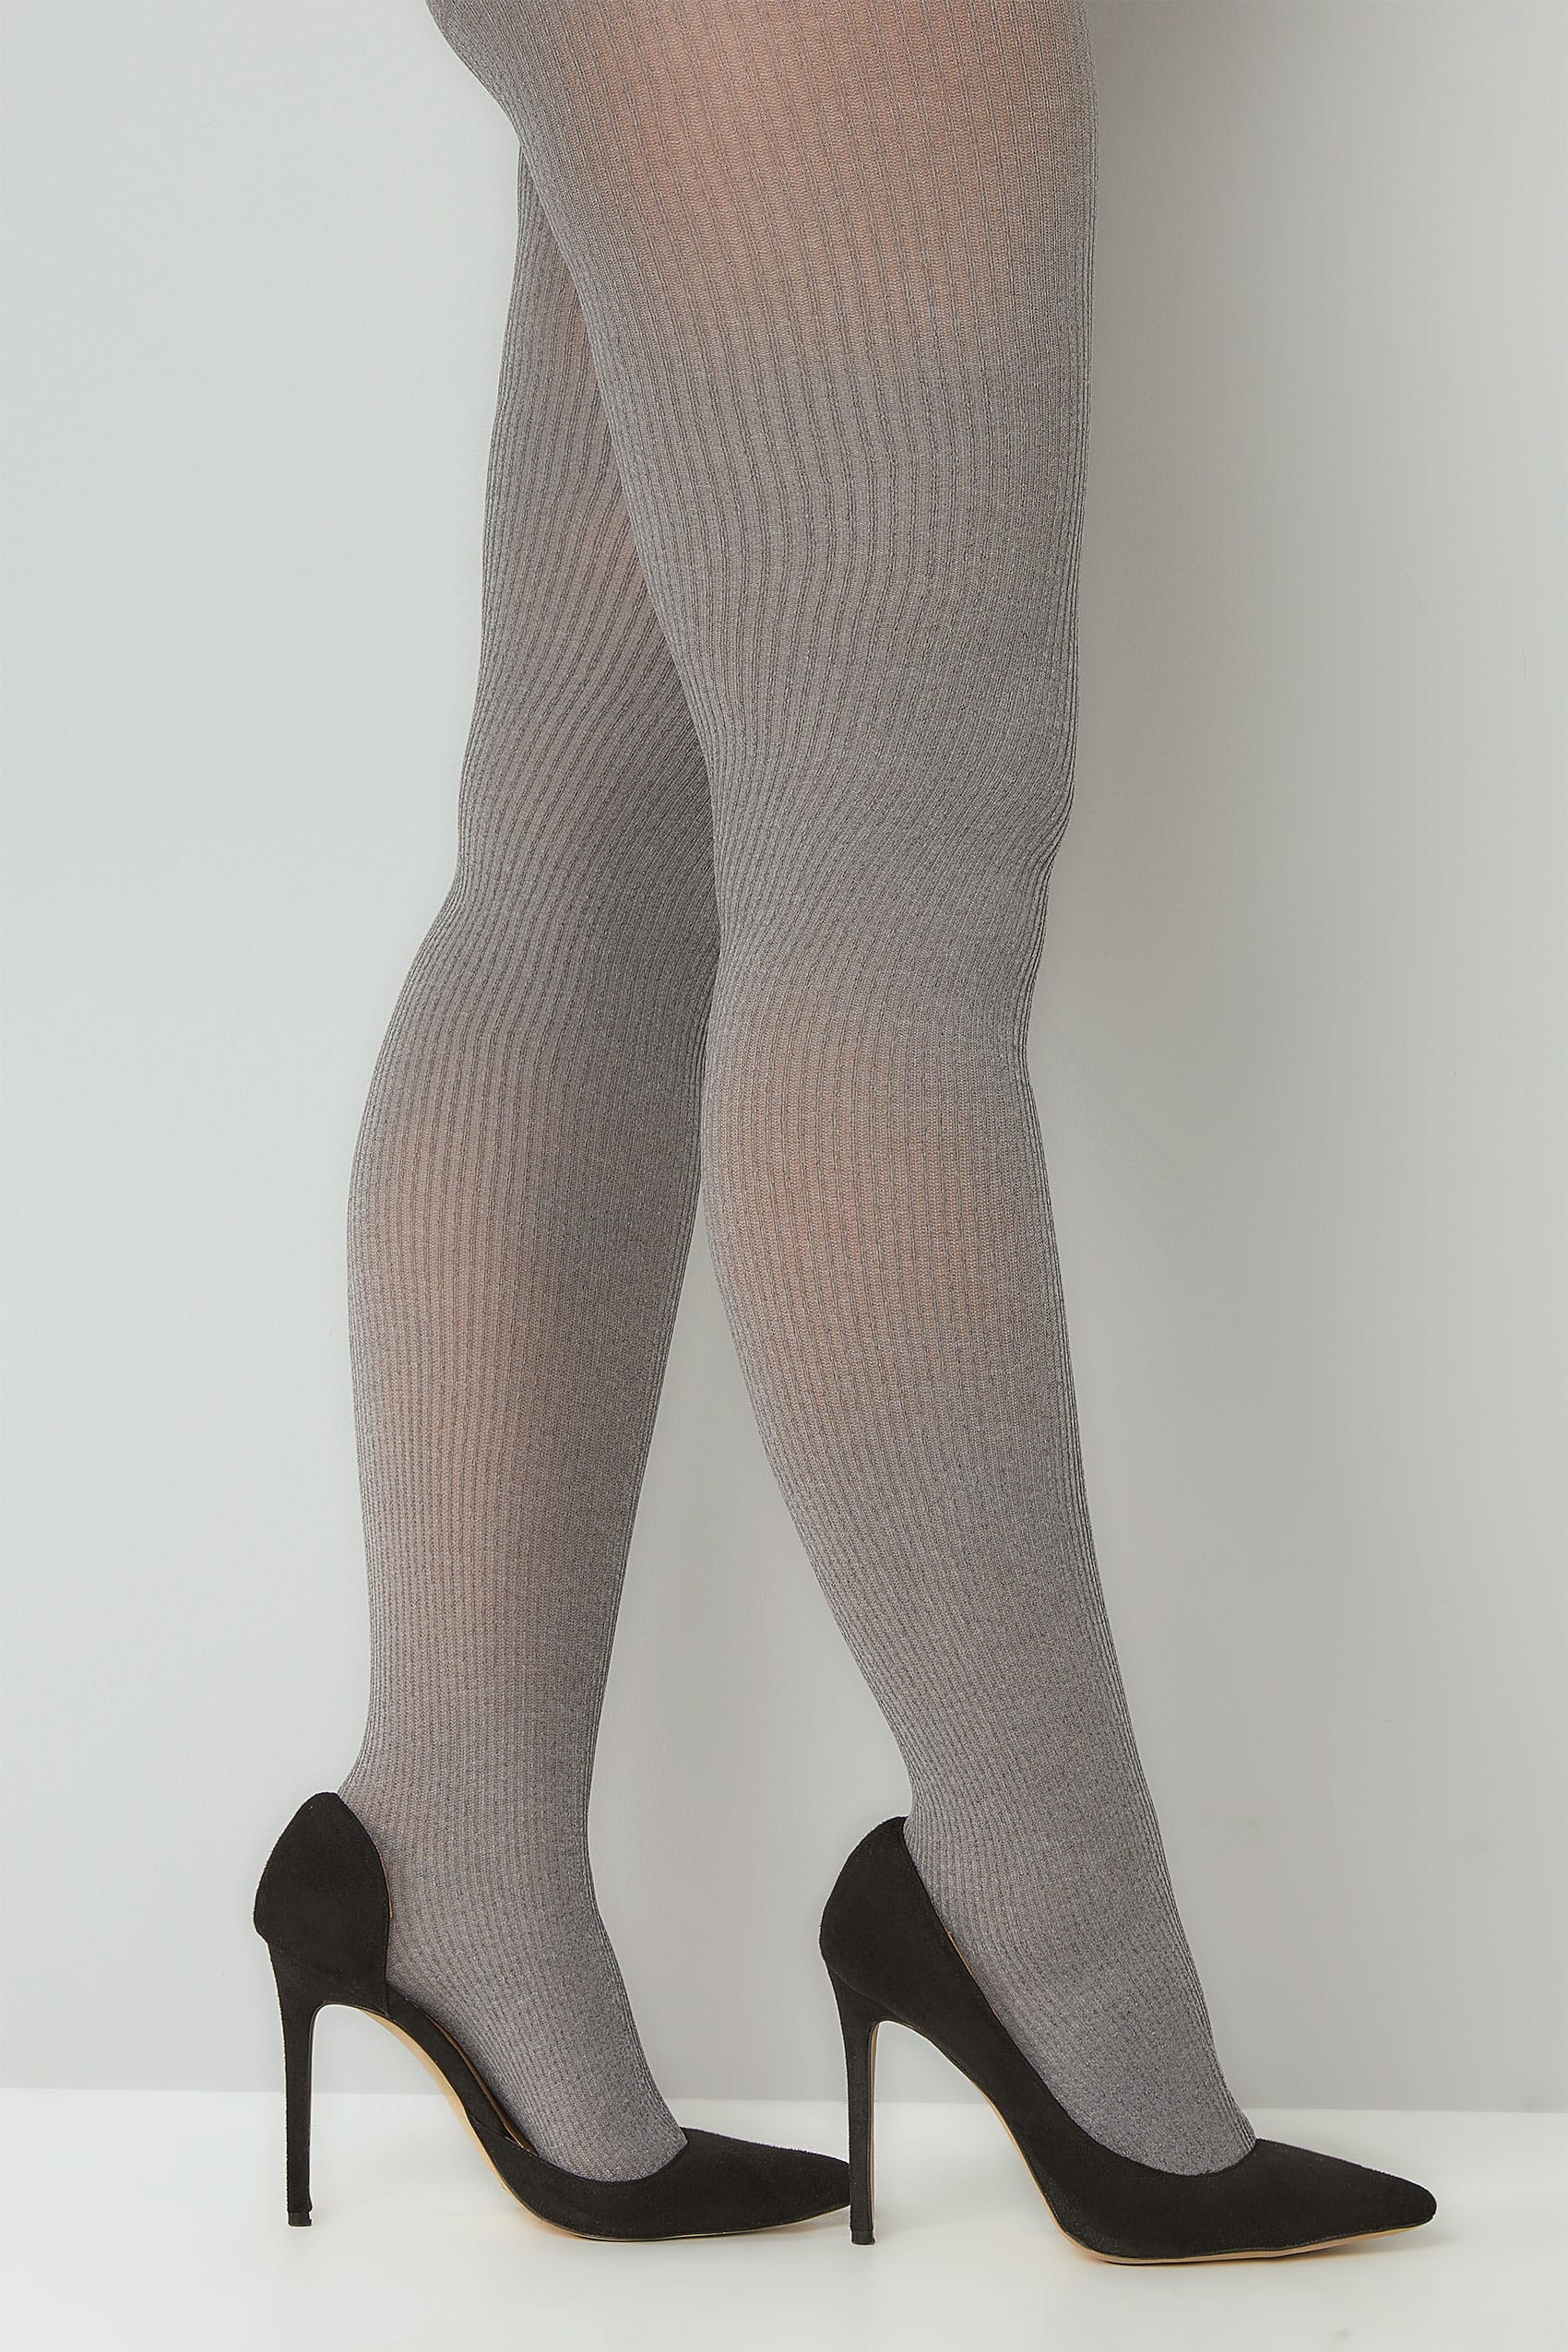 Grey Ribbed Tights Plus Size 16 20 22 26 28 30